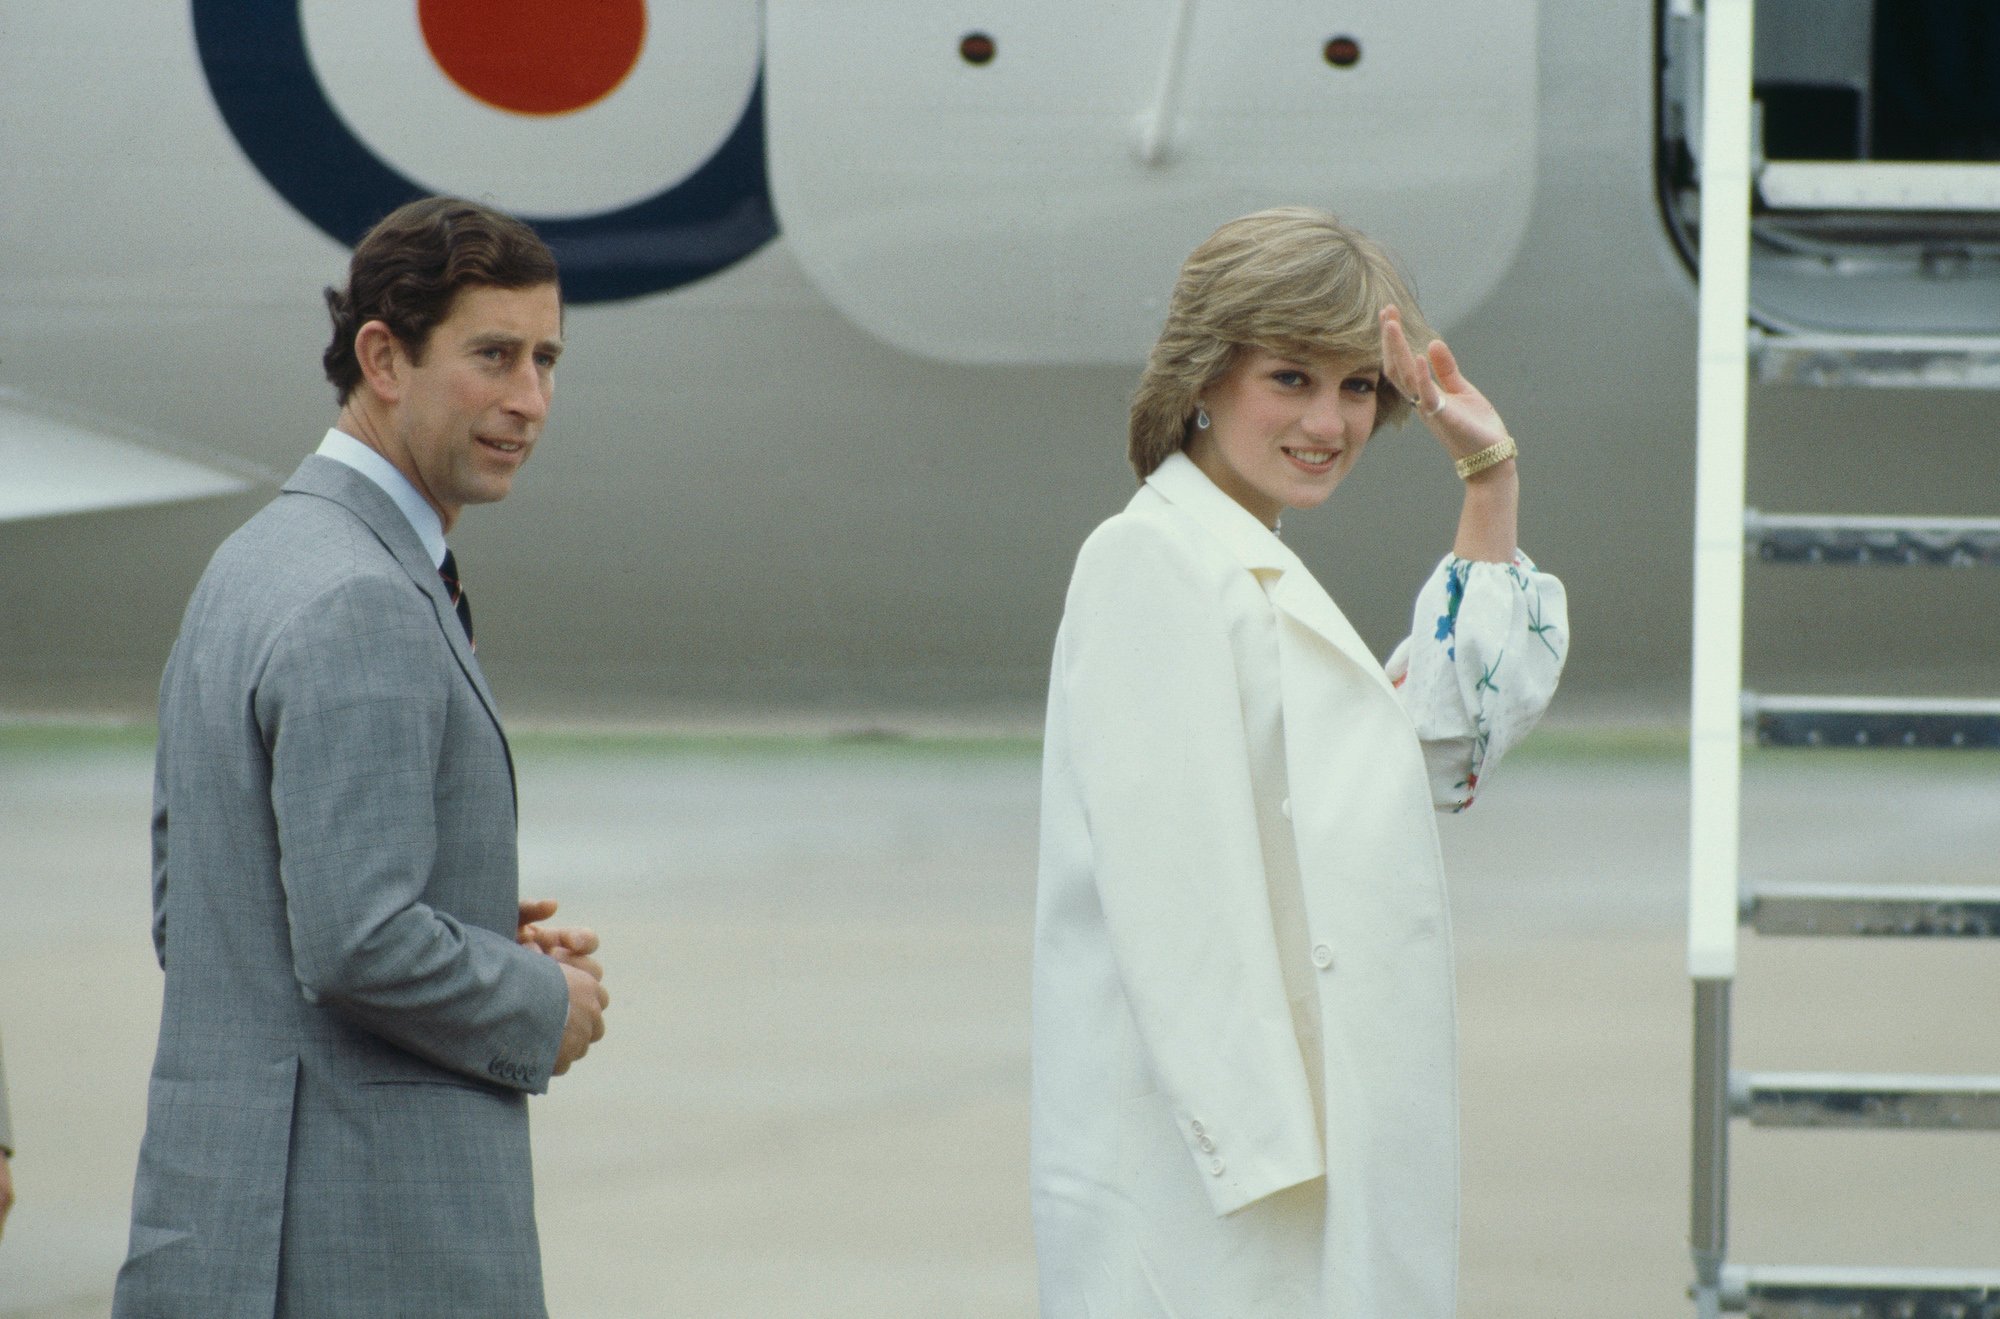 Princess Diana waves as she and Prince Charles get on a plane at the start of their honeymoon